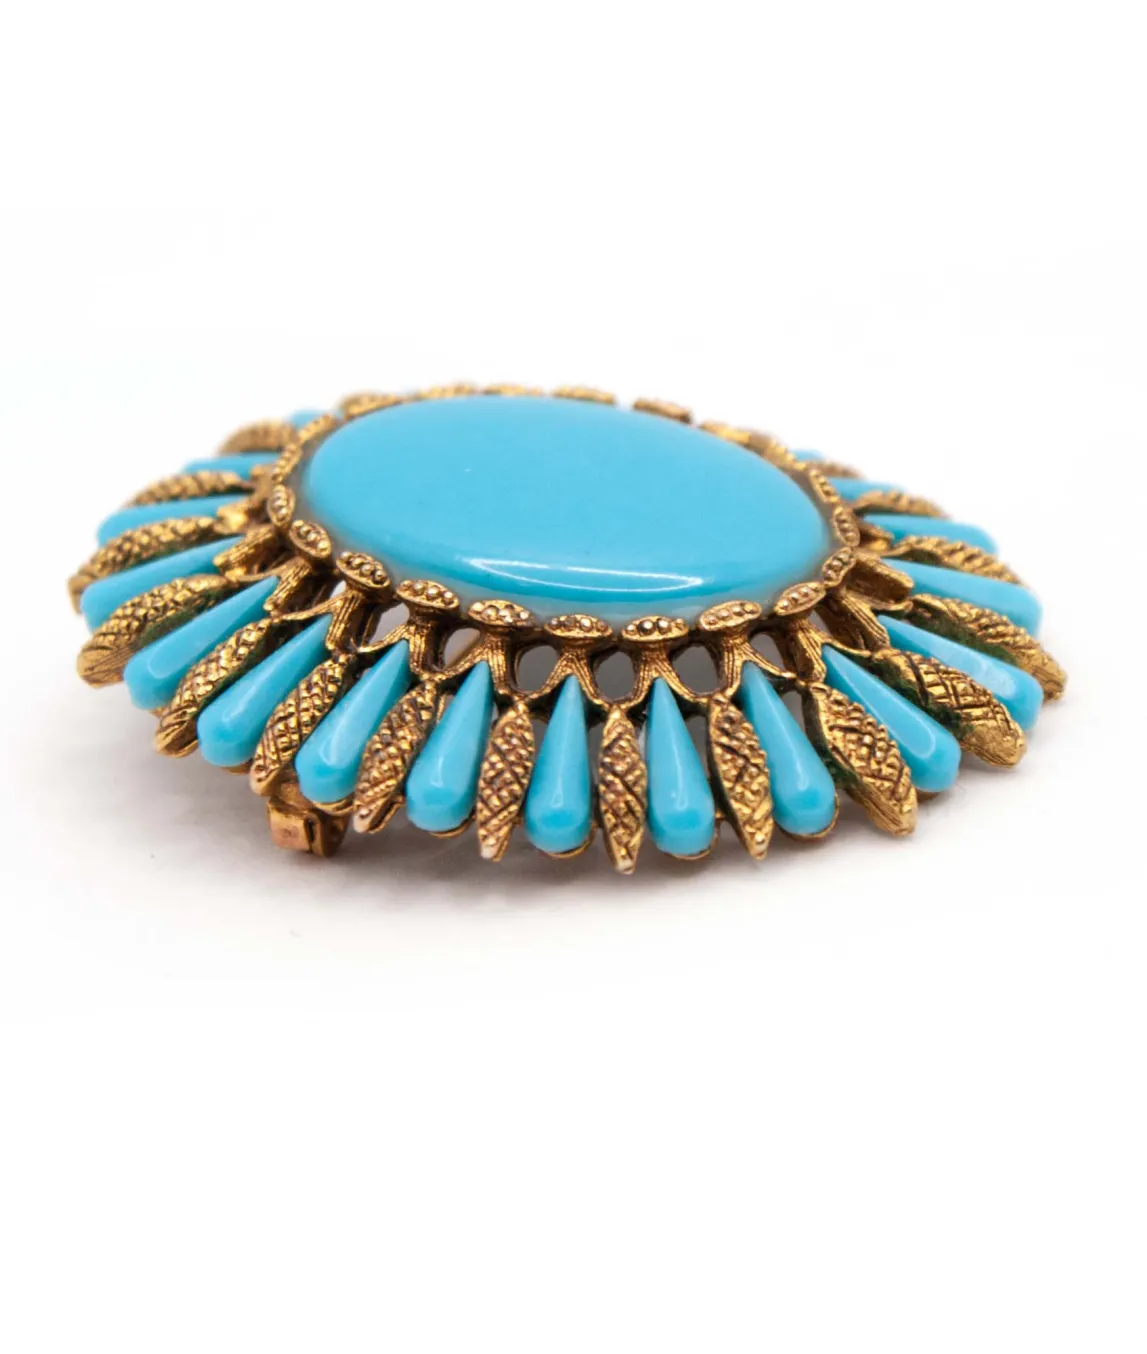 Vintage oval shaped turquoise glass brooch by HAR side view